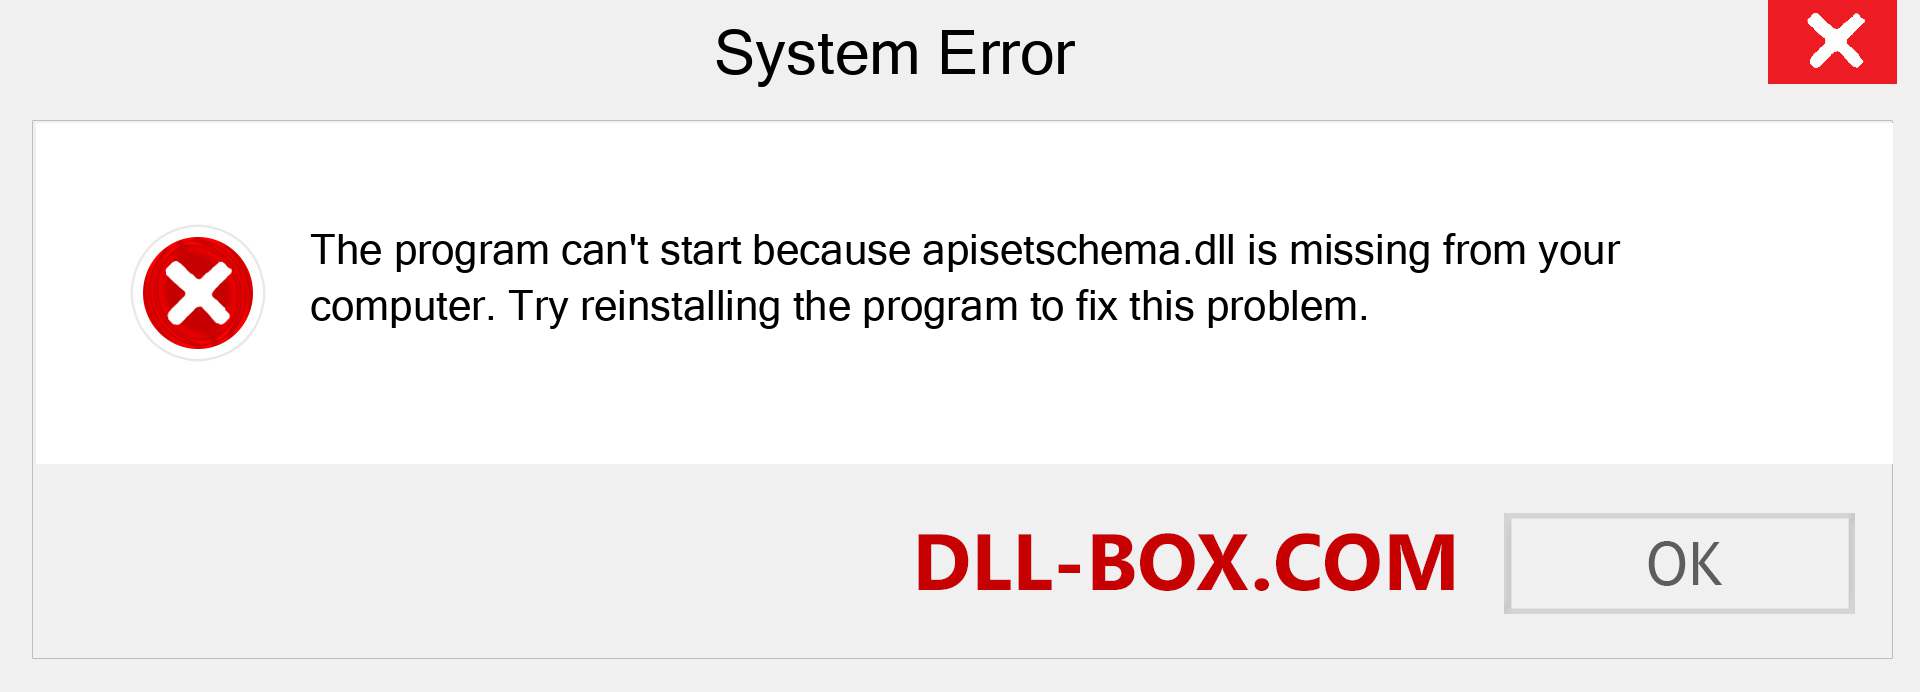  apisetschema.dll file is missing?. Download for Windows 7, 8, 10 - Fix  apisetschema dll Missing Error on Windows, photos, images